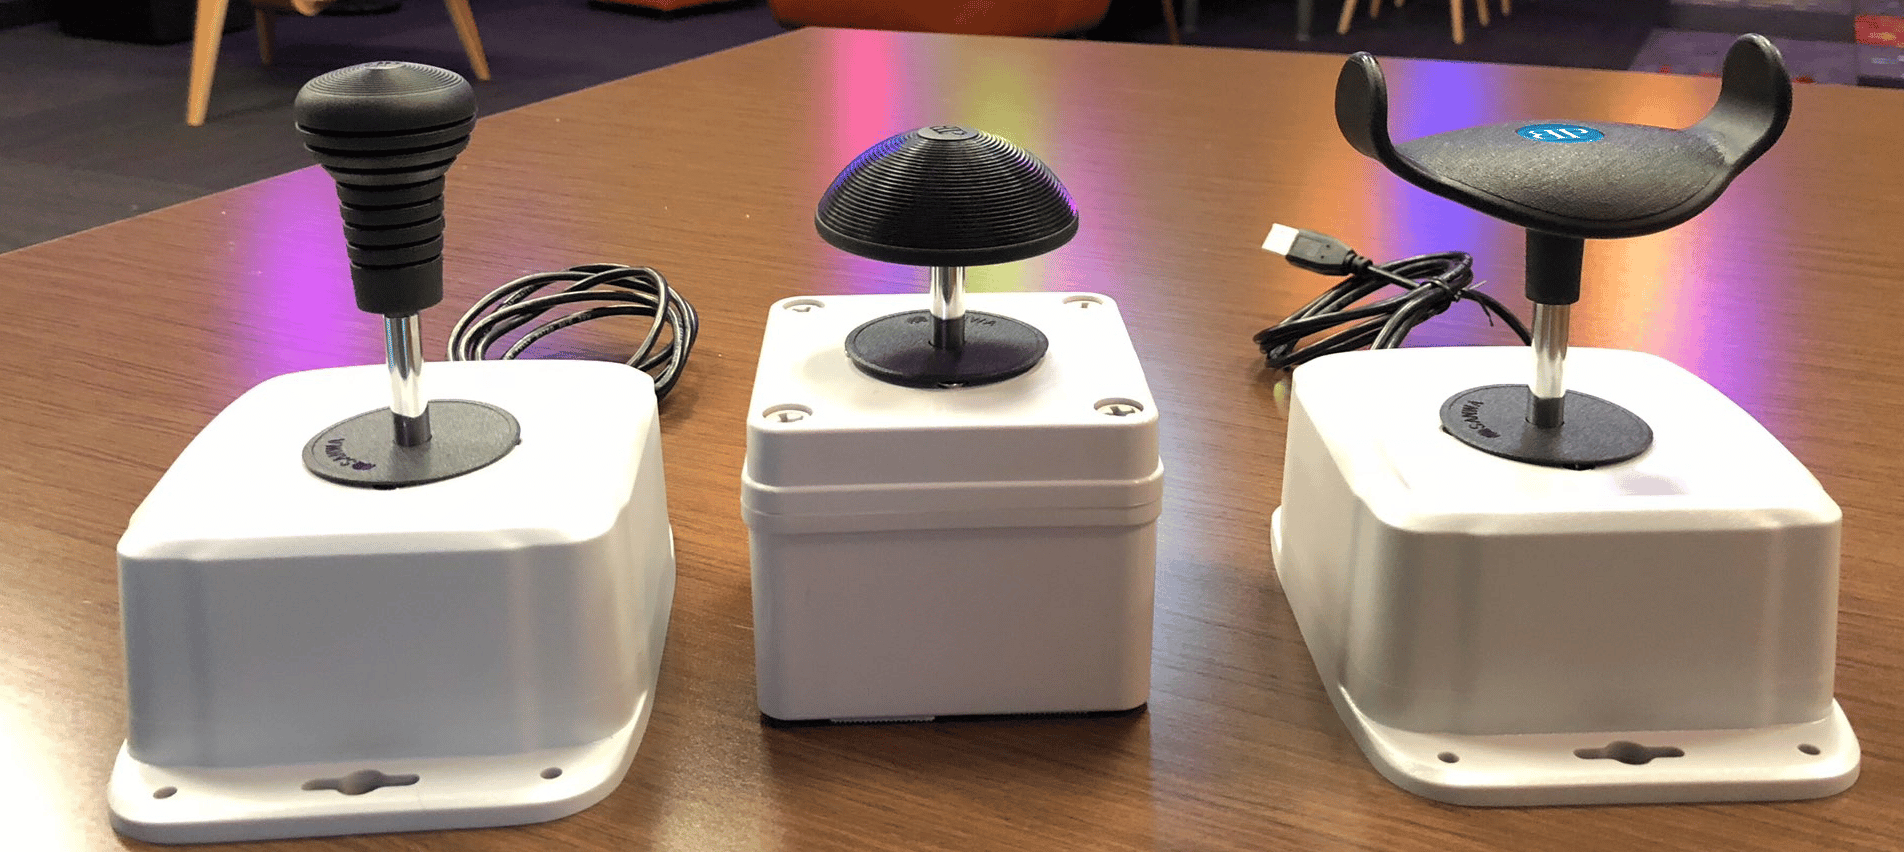 Three joysticks mounted to white boxes. The left one has a standard black joystick top, the middle one has a black, dome shaped top, and the right one has a black, u-shaped top. 